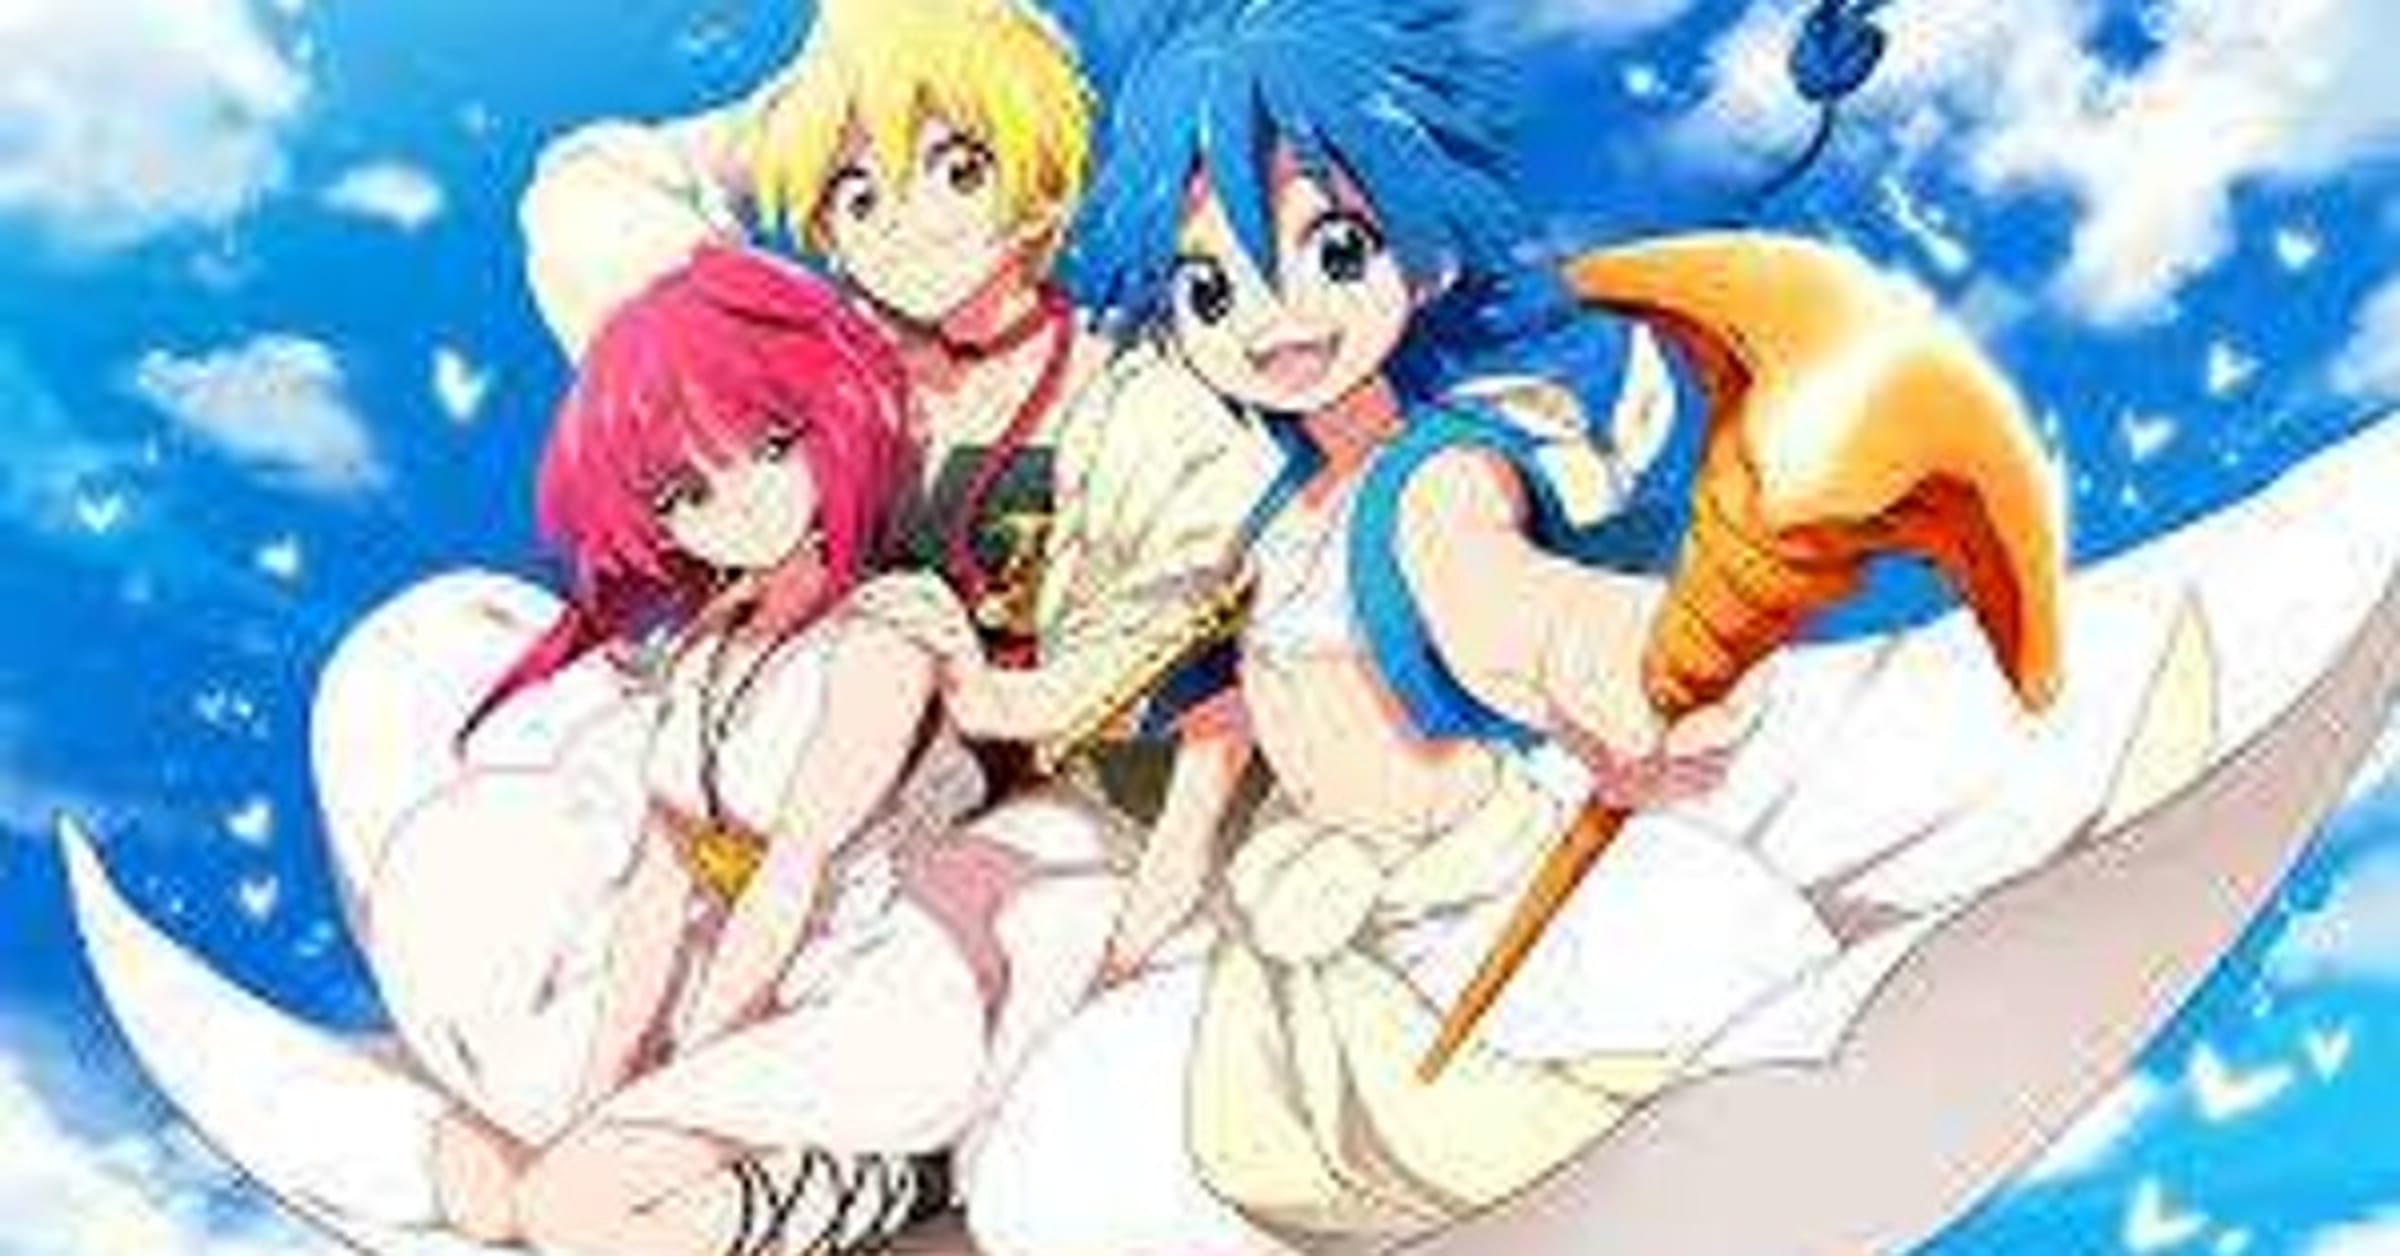 More Magi: The Labyrinth Of Magic Characters Revealed - Siliconera